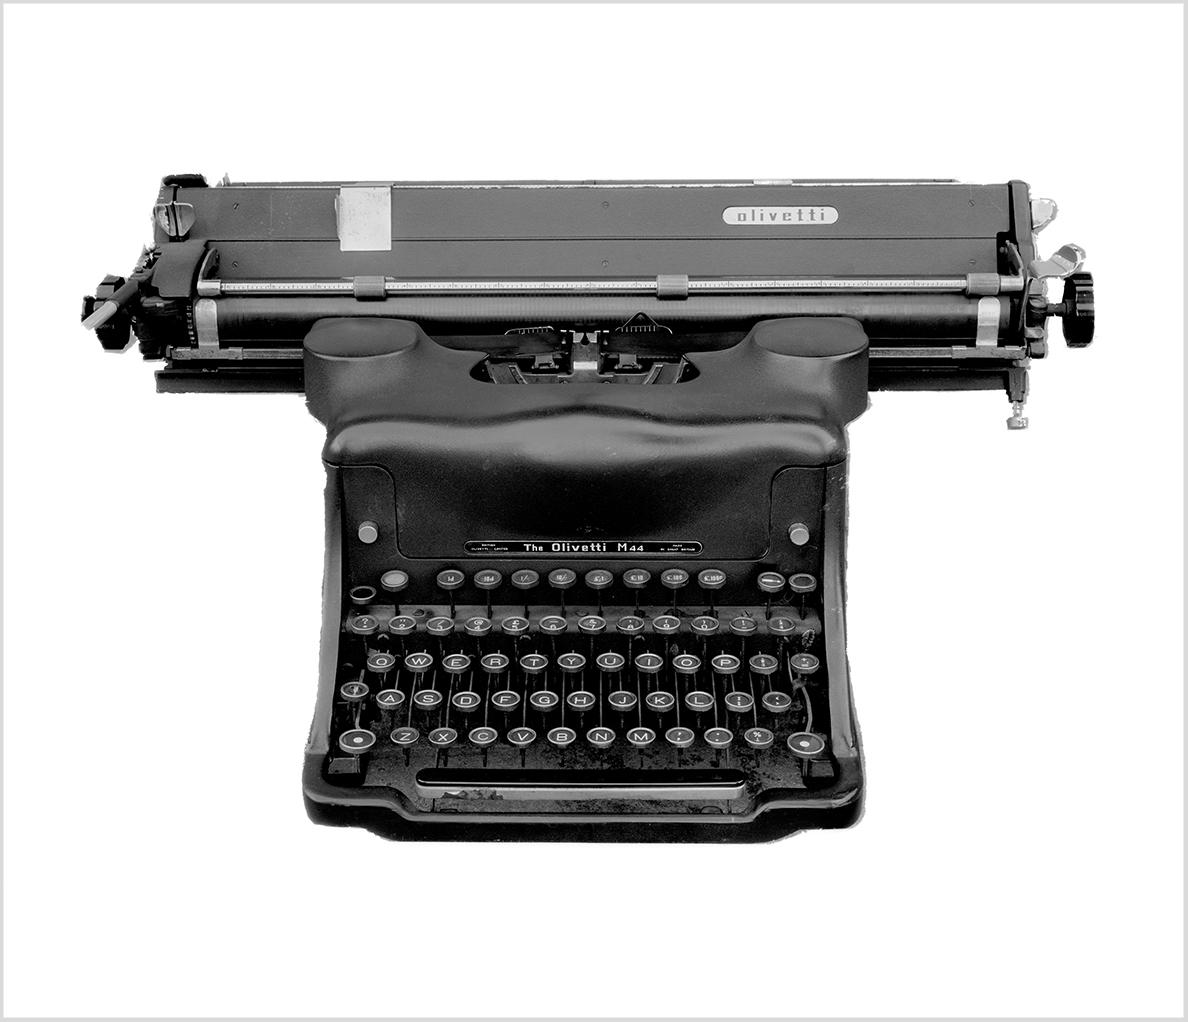 Samuel Field Still-Life Photograph - Orthochromatic Positive - Black & White Photography of a Typewriter